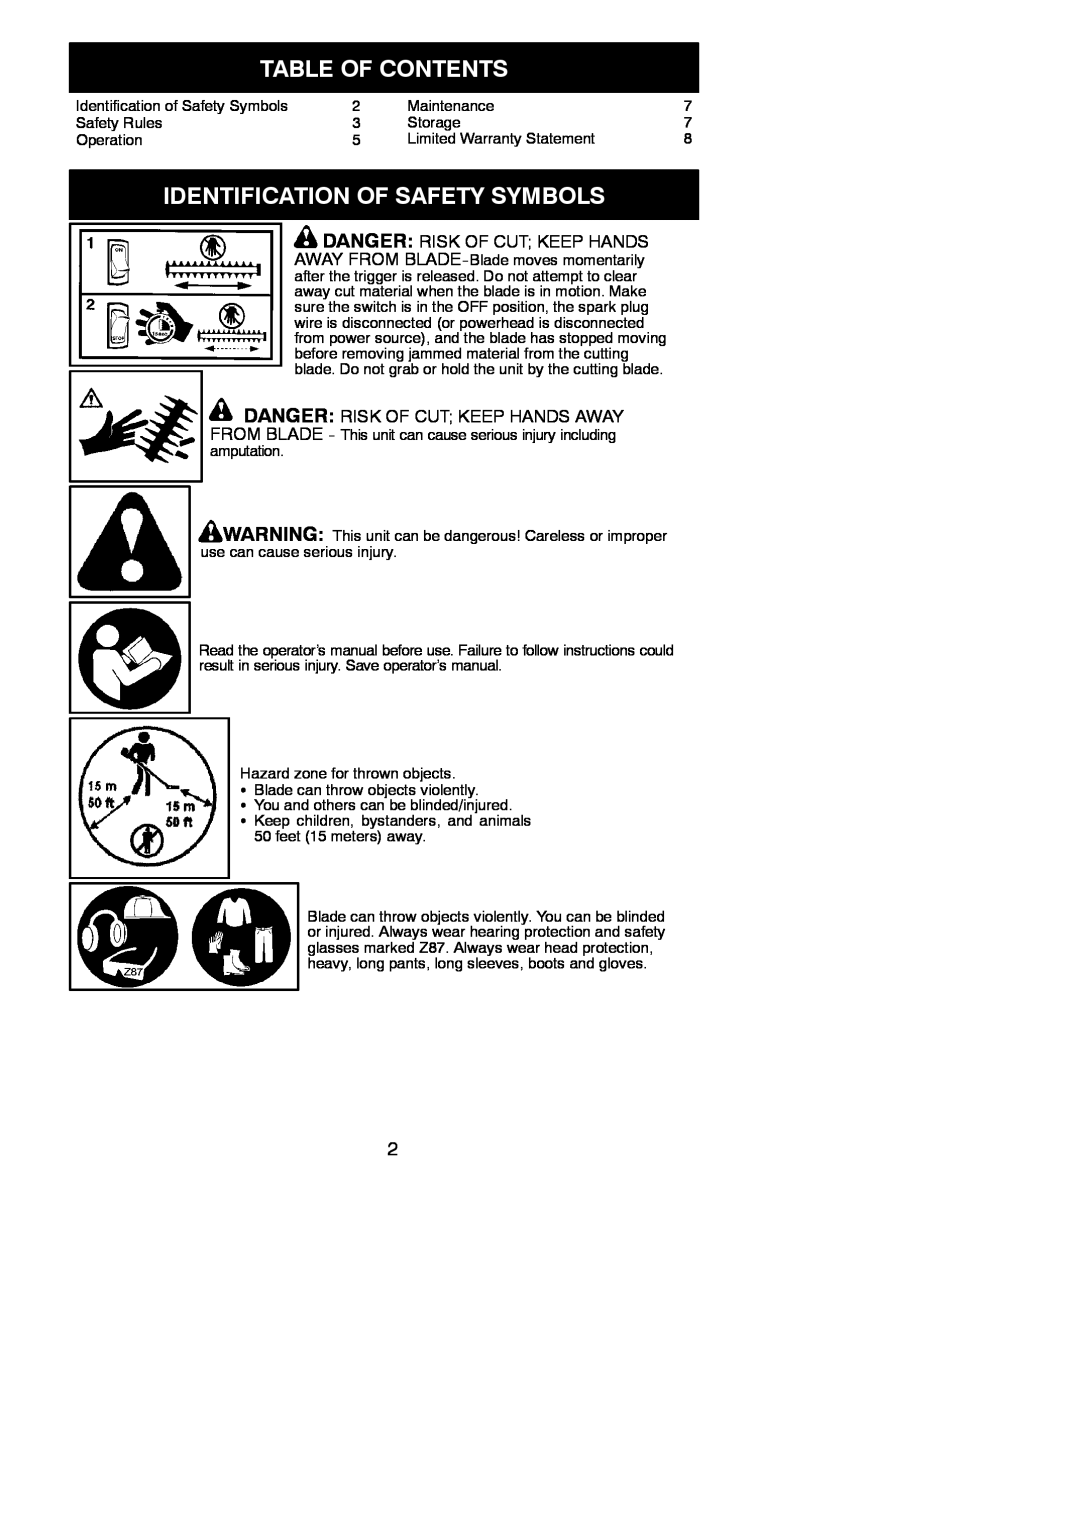 Poulan PP6000H, 952711674, 545186848 Table Of Contents, Identification Of Safety Symbols, Danger Risk Of Cut Keep Hands 